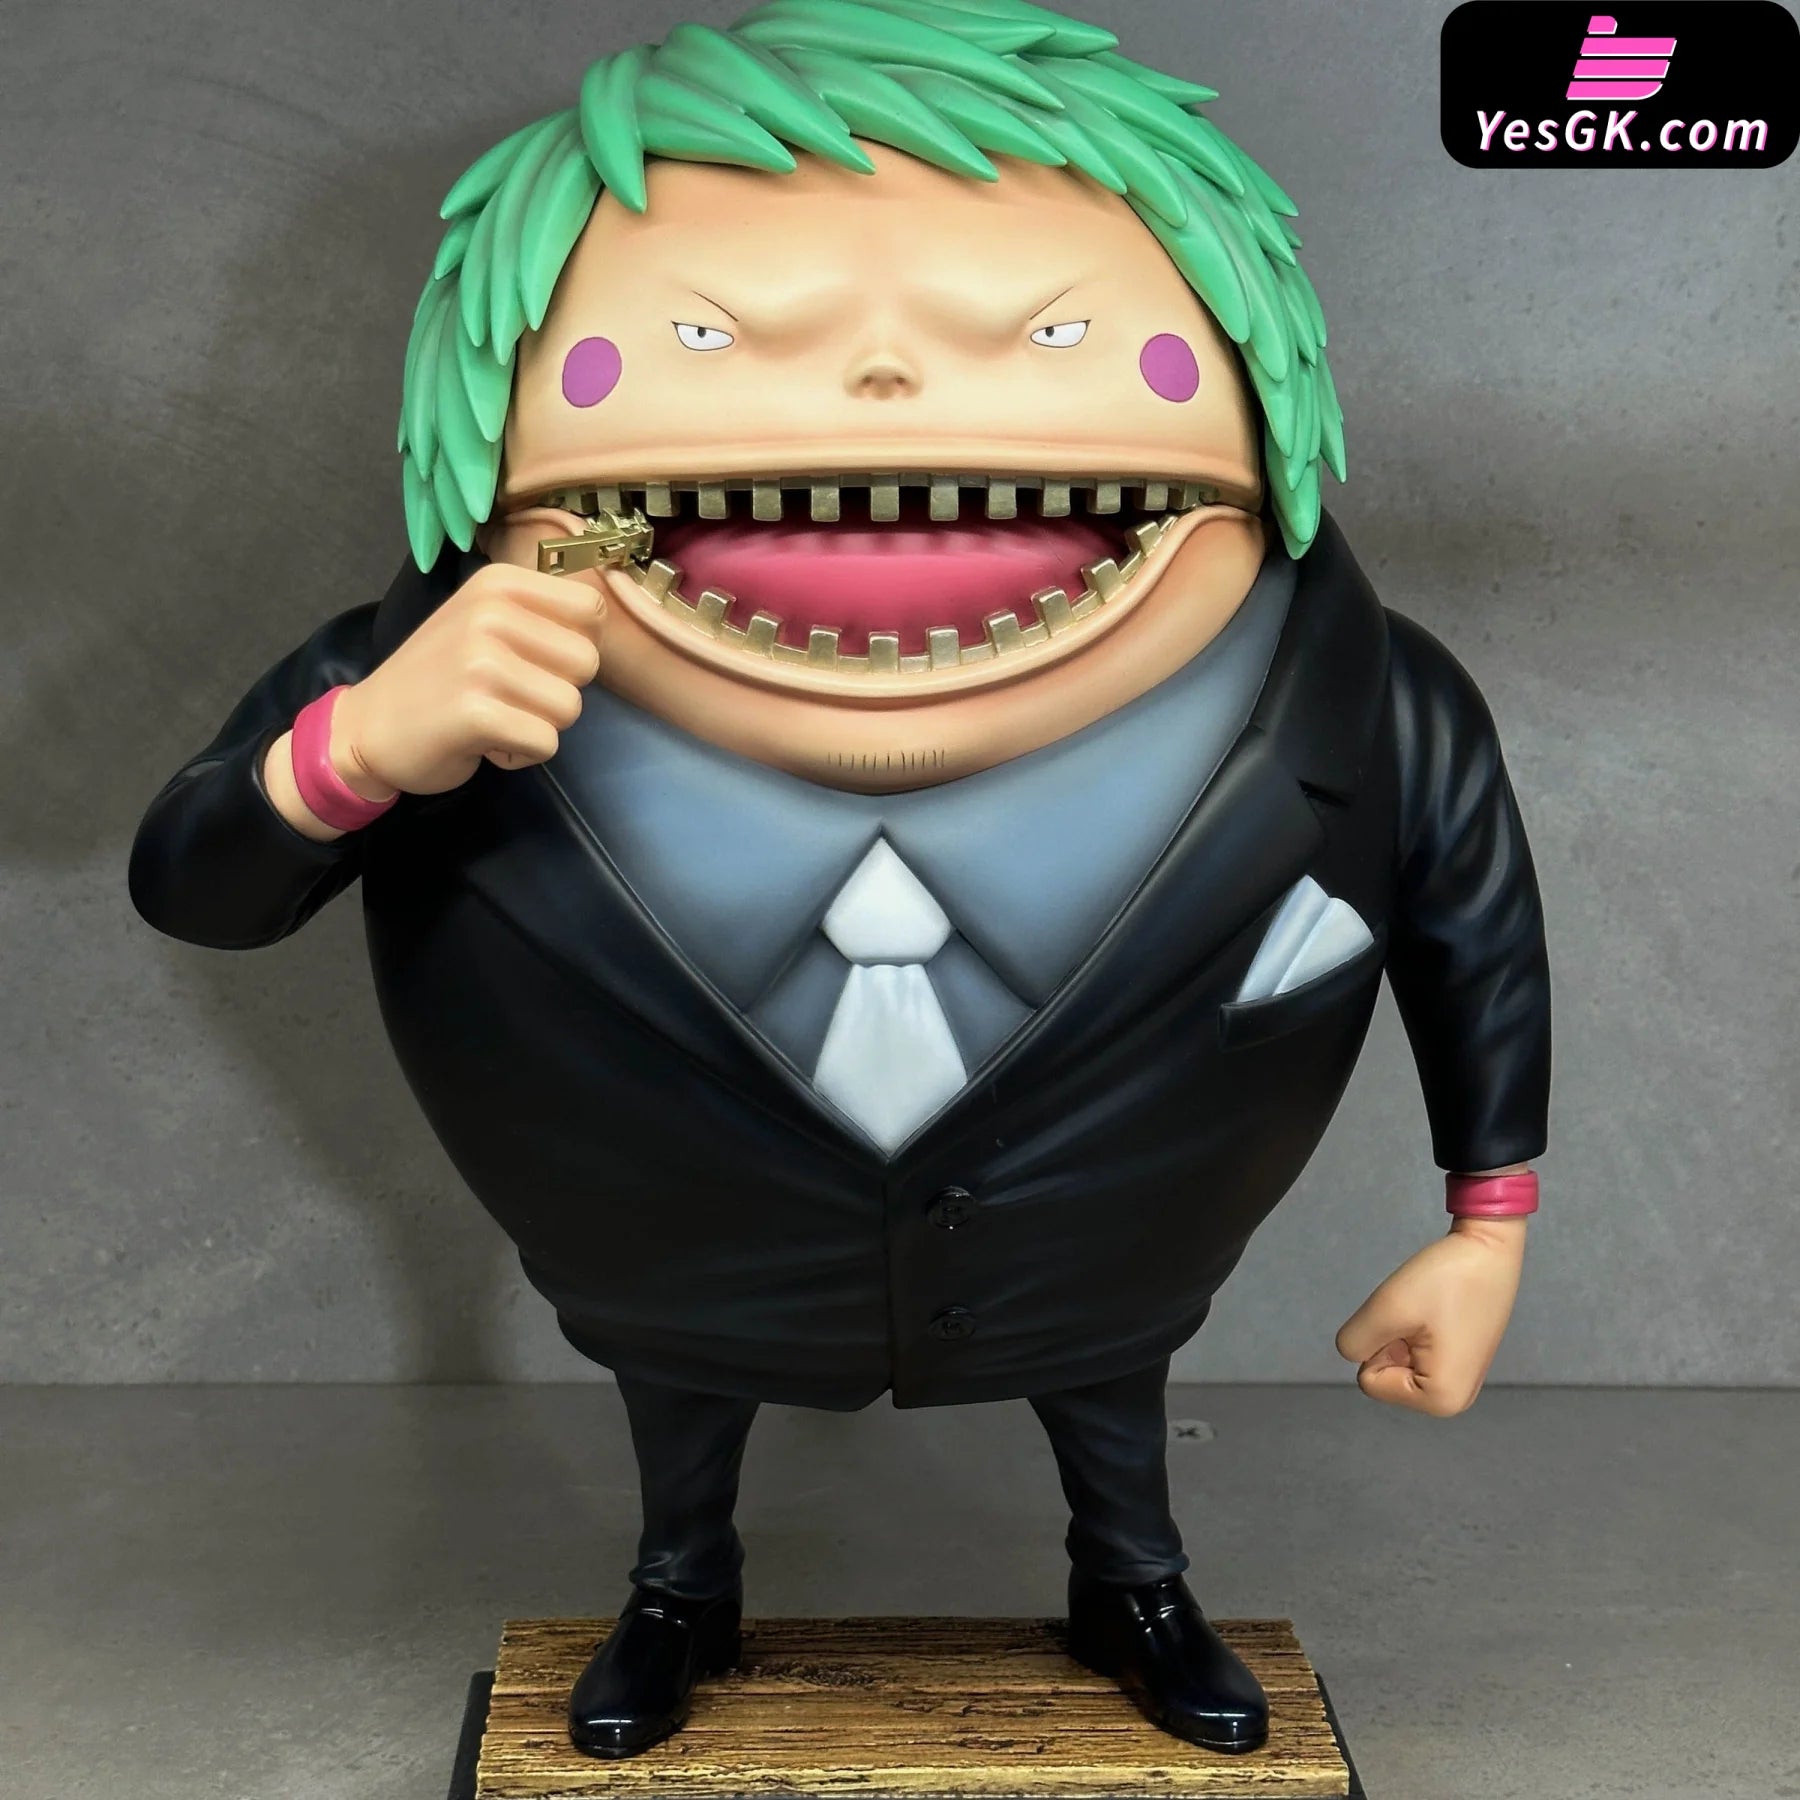 One Piece Cp9 Chababa Resin Statue - Brain-Hole Studio [Pre-Order]